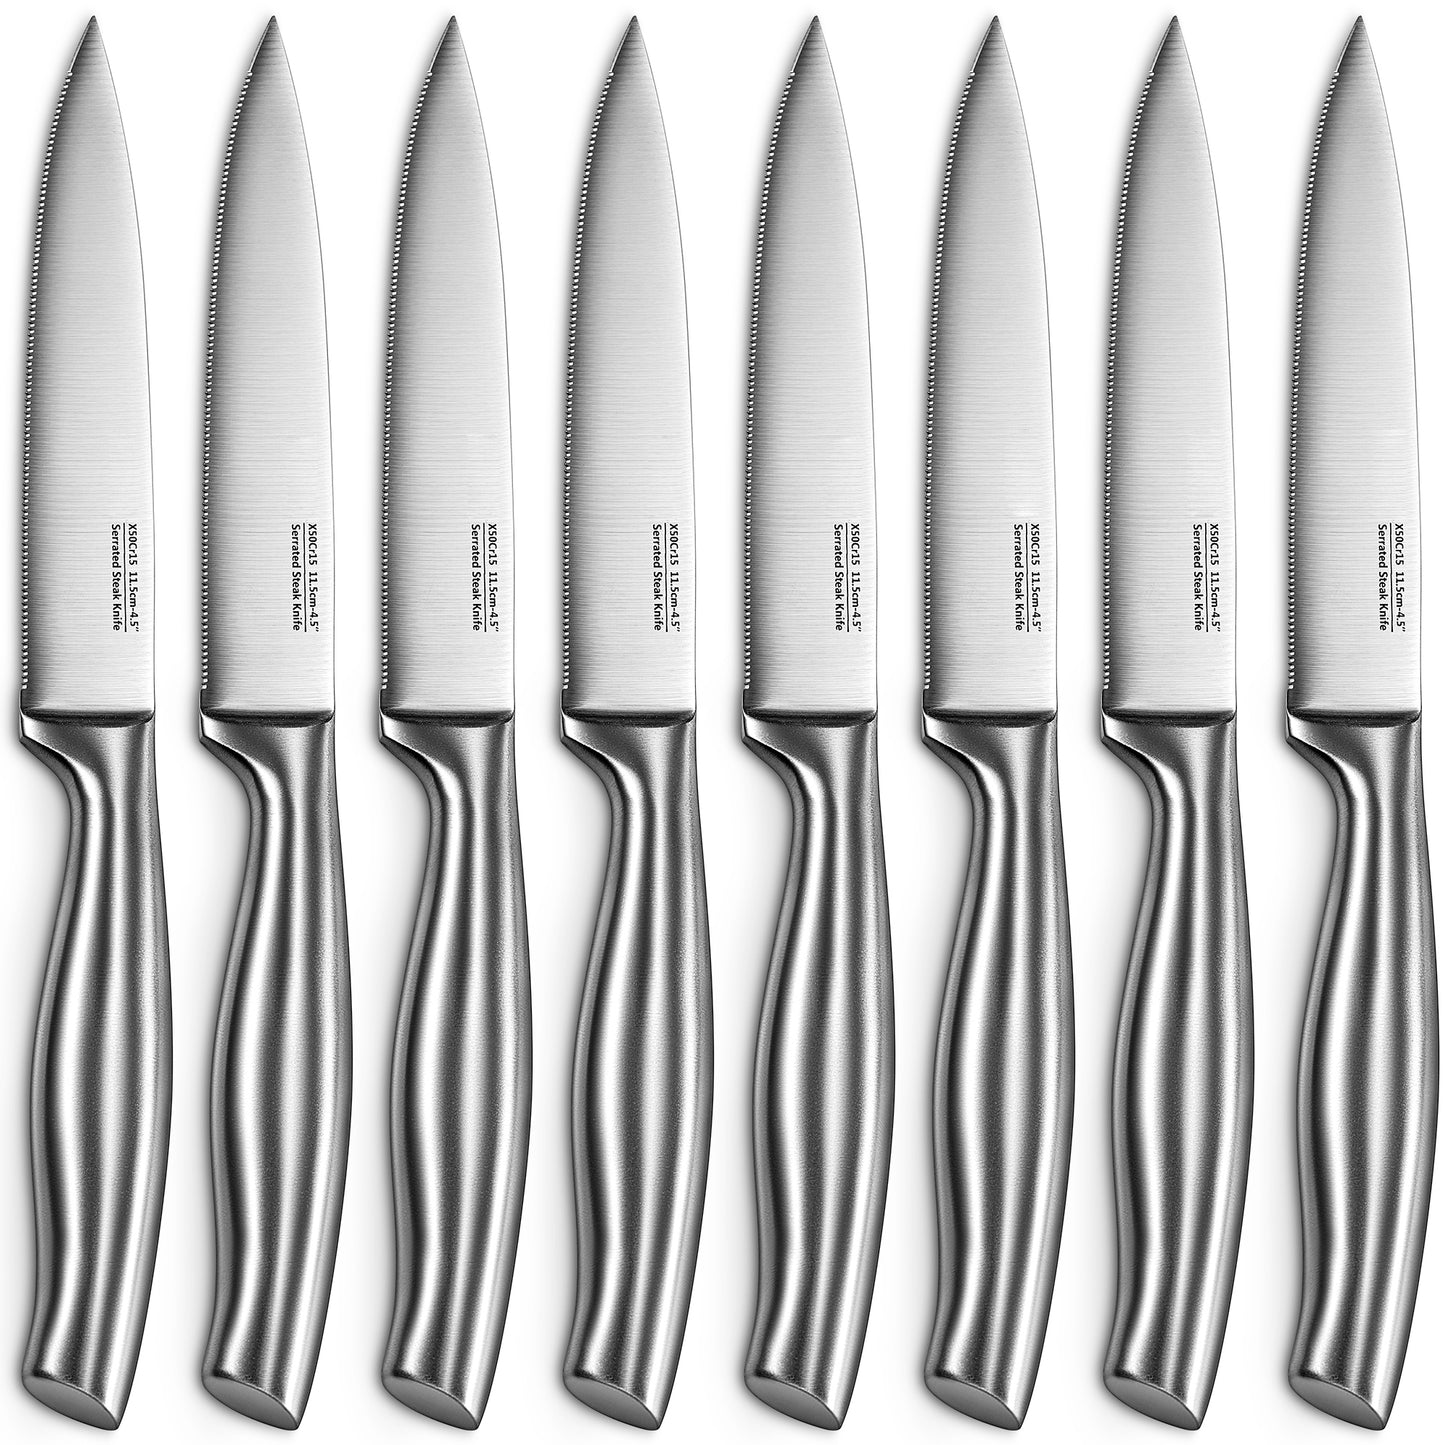 Steak Knives, Serrated Steak Knives with Gift Box, Stainless Steel Kitchen  Steak Knife Set of 8, Silver